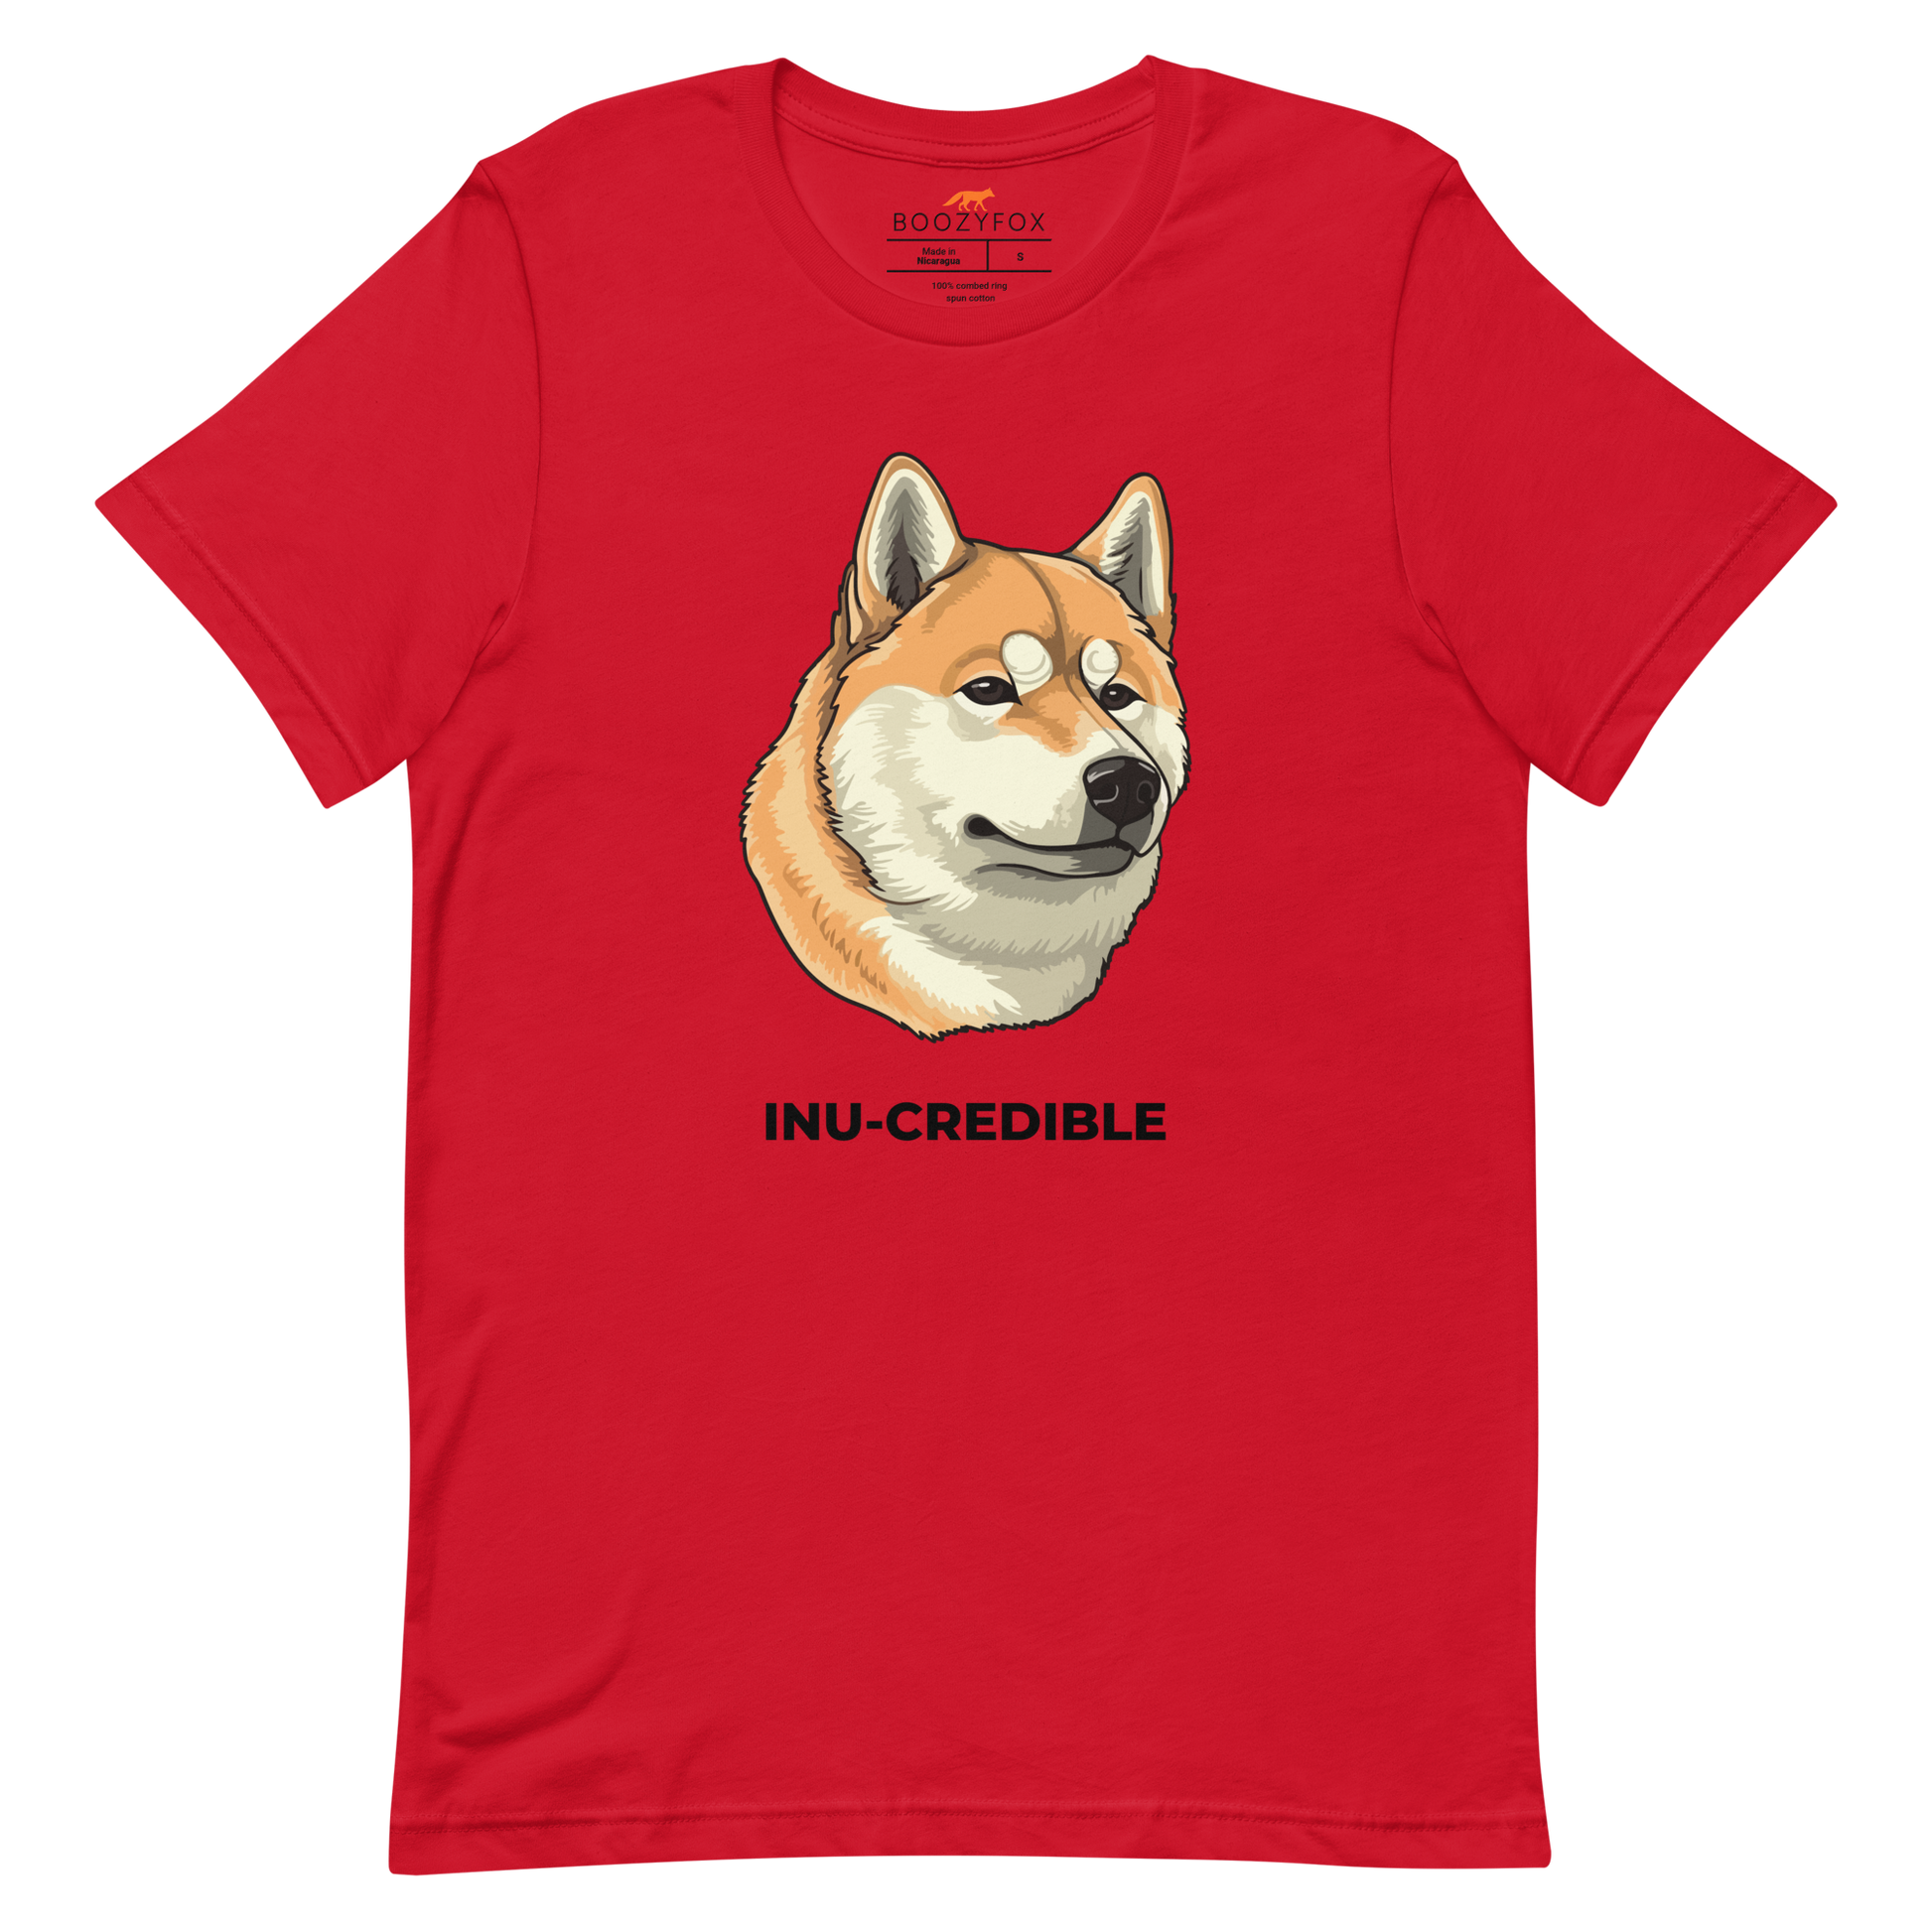 Red Premium Shiba Inu T-Shirt featuring the Inu-Credible graphic on the chest - Funny Graphic Shiba Inu Tees - Boozy Fox